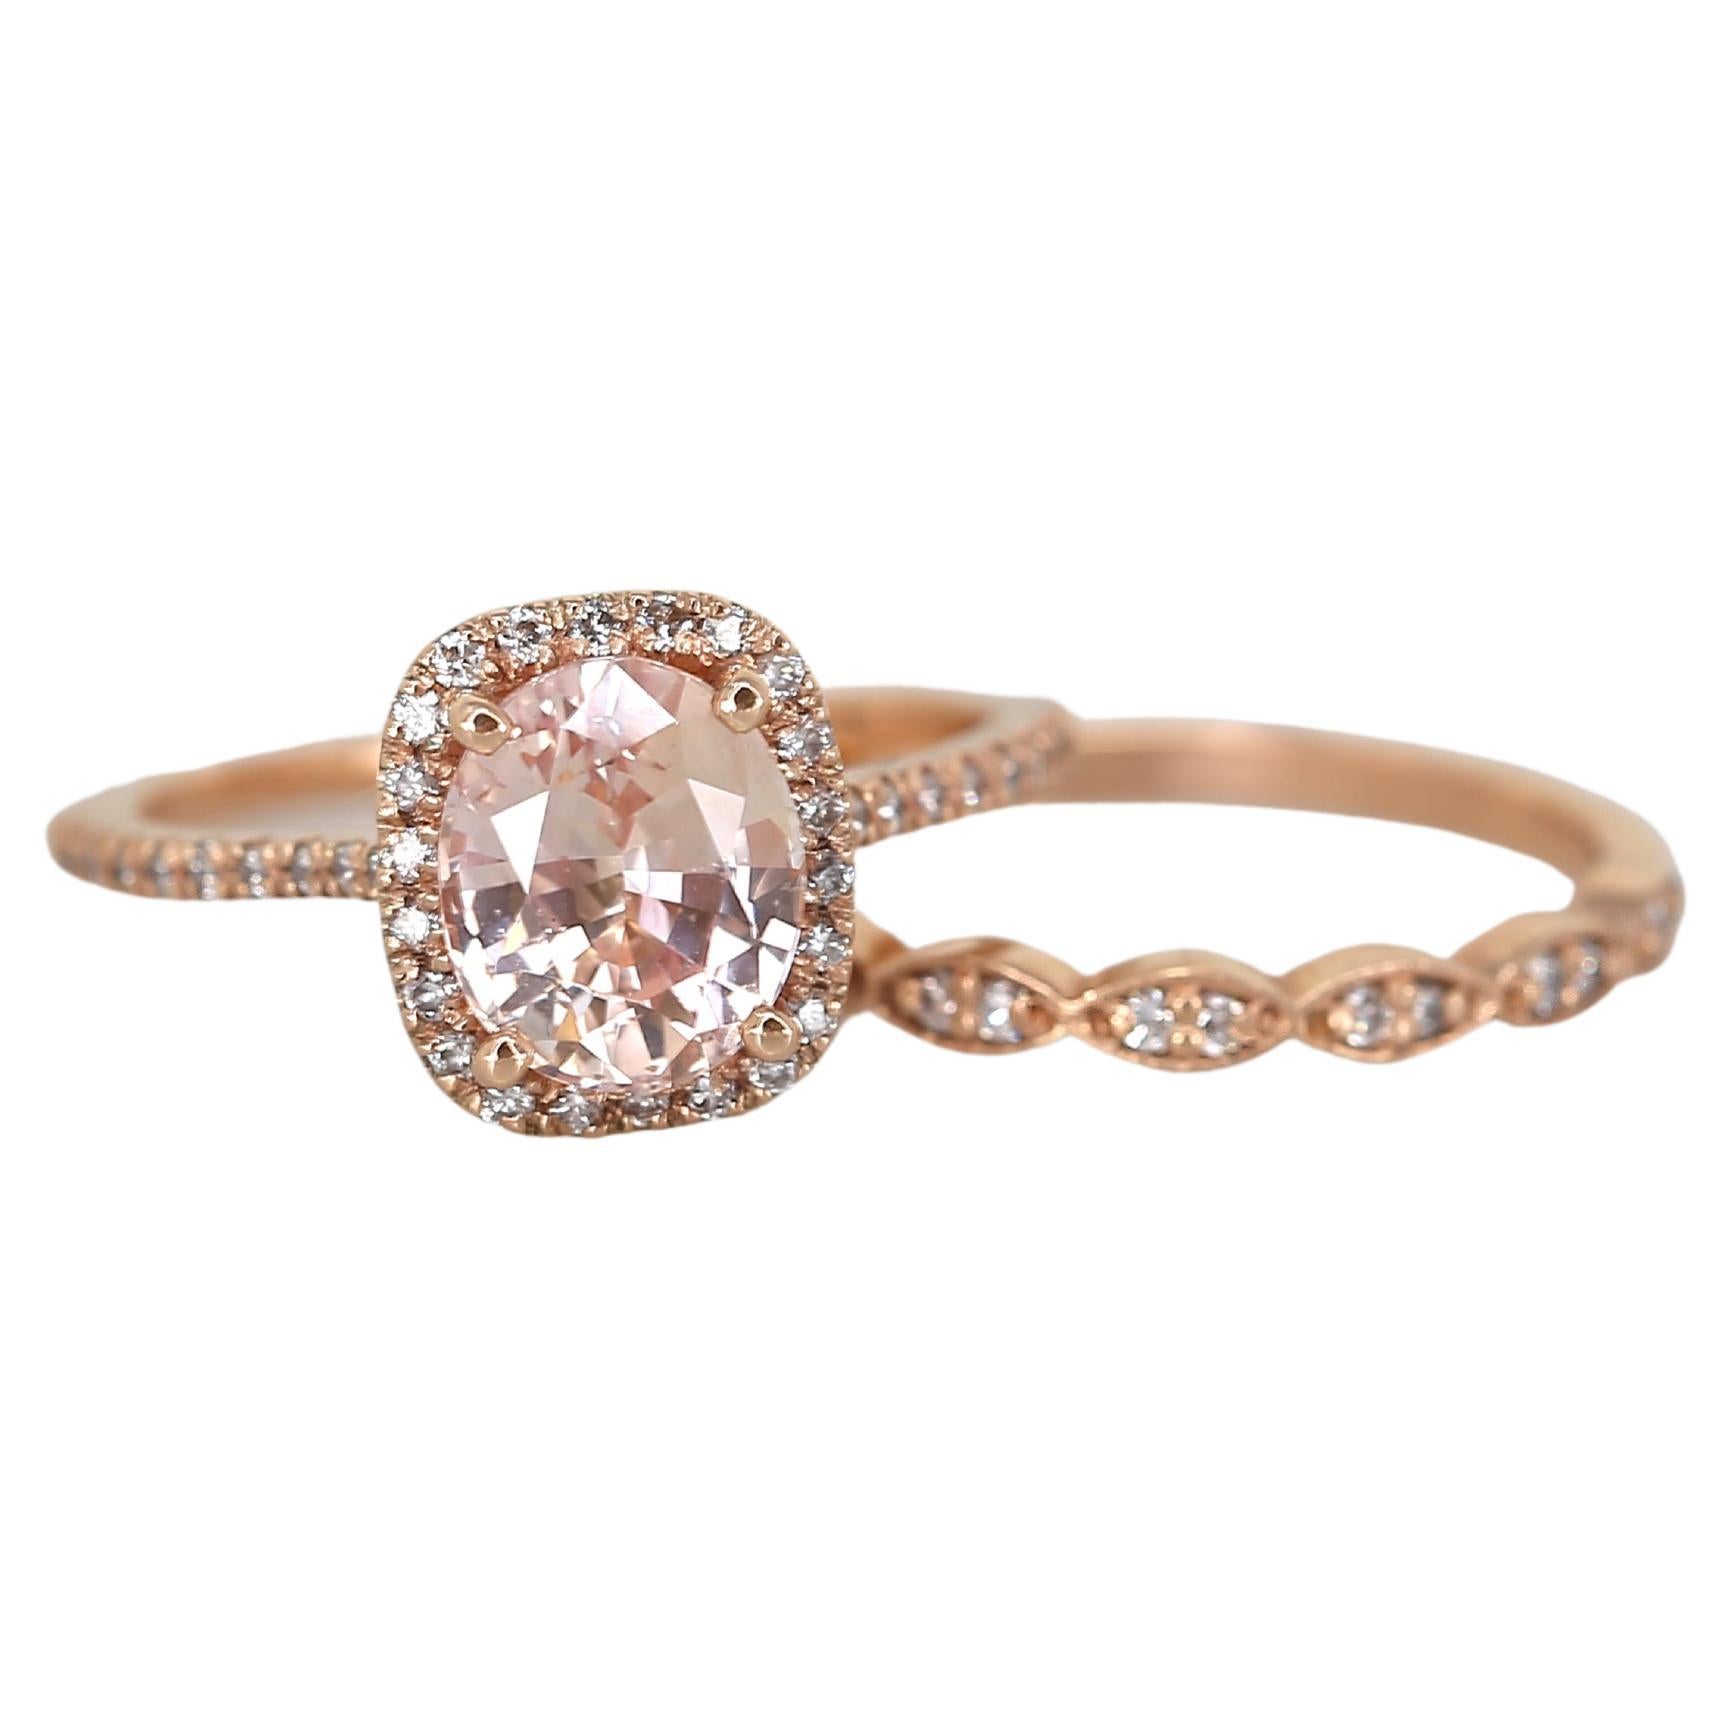 Say hello to an exquisite art deco-inspired bridal set with a unique peach sapphire center stone. Our expert artisans delicately mount pave and shared prong style diamonds, creating a stunning, sparkling design. Experience the perfect blend of